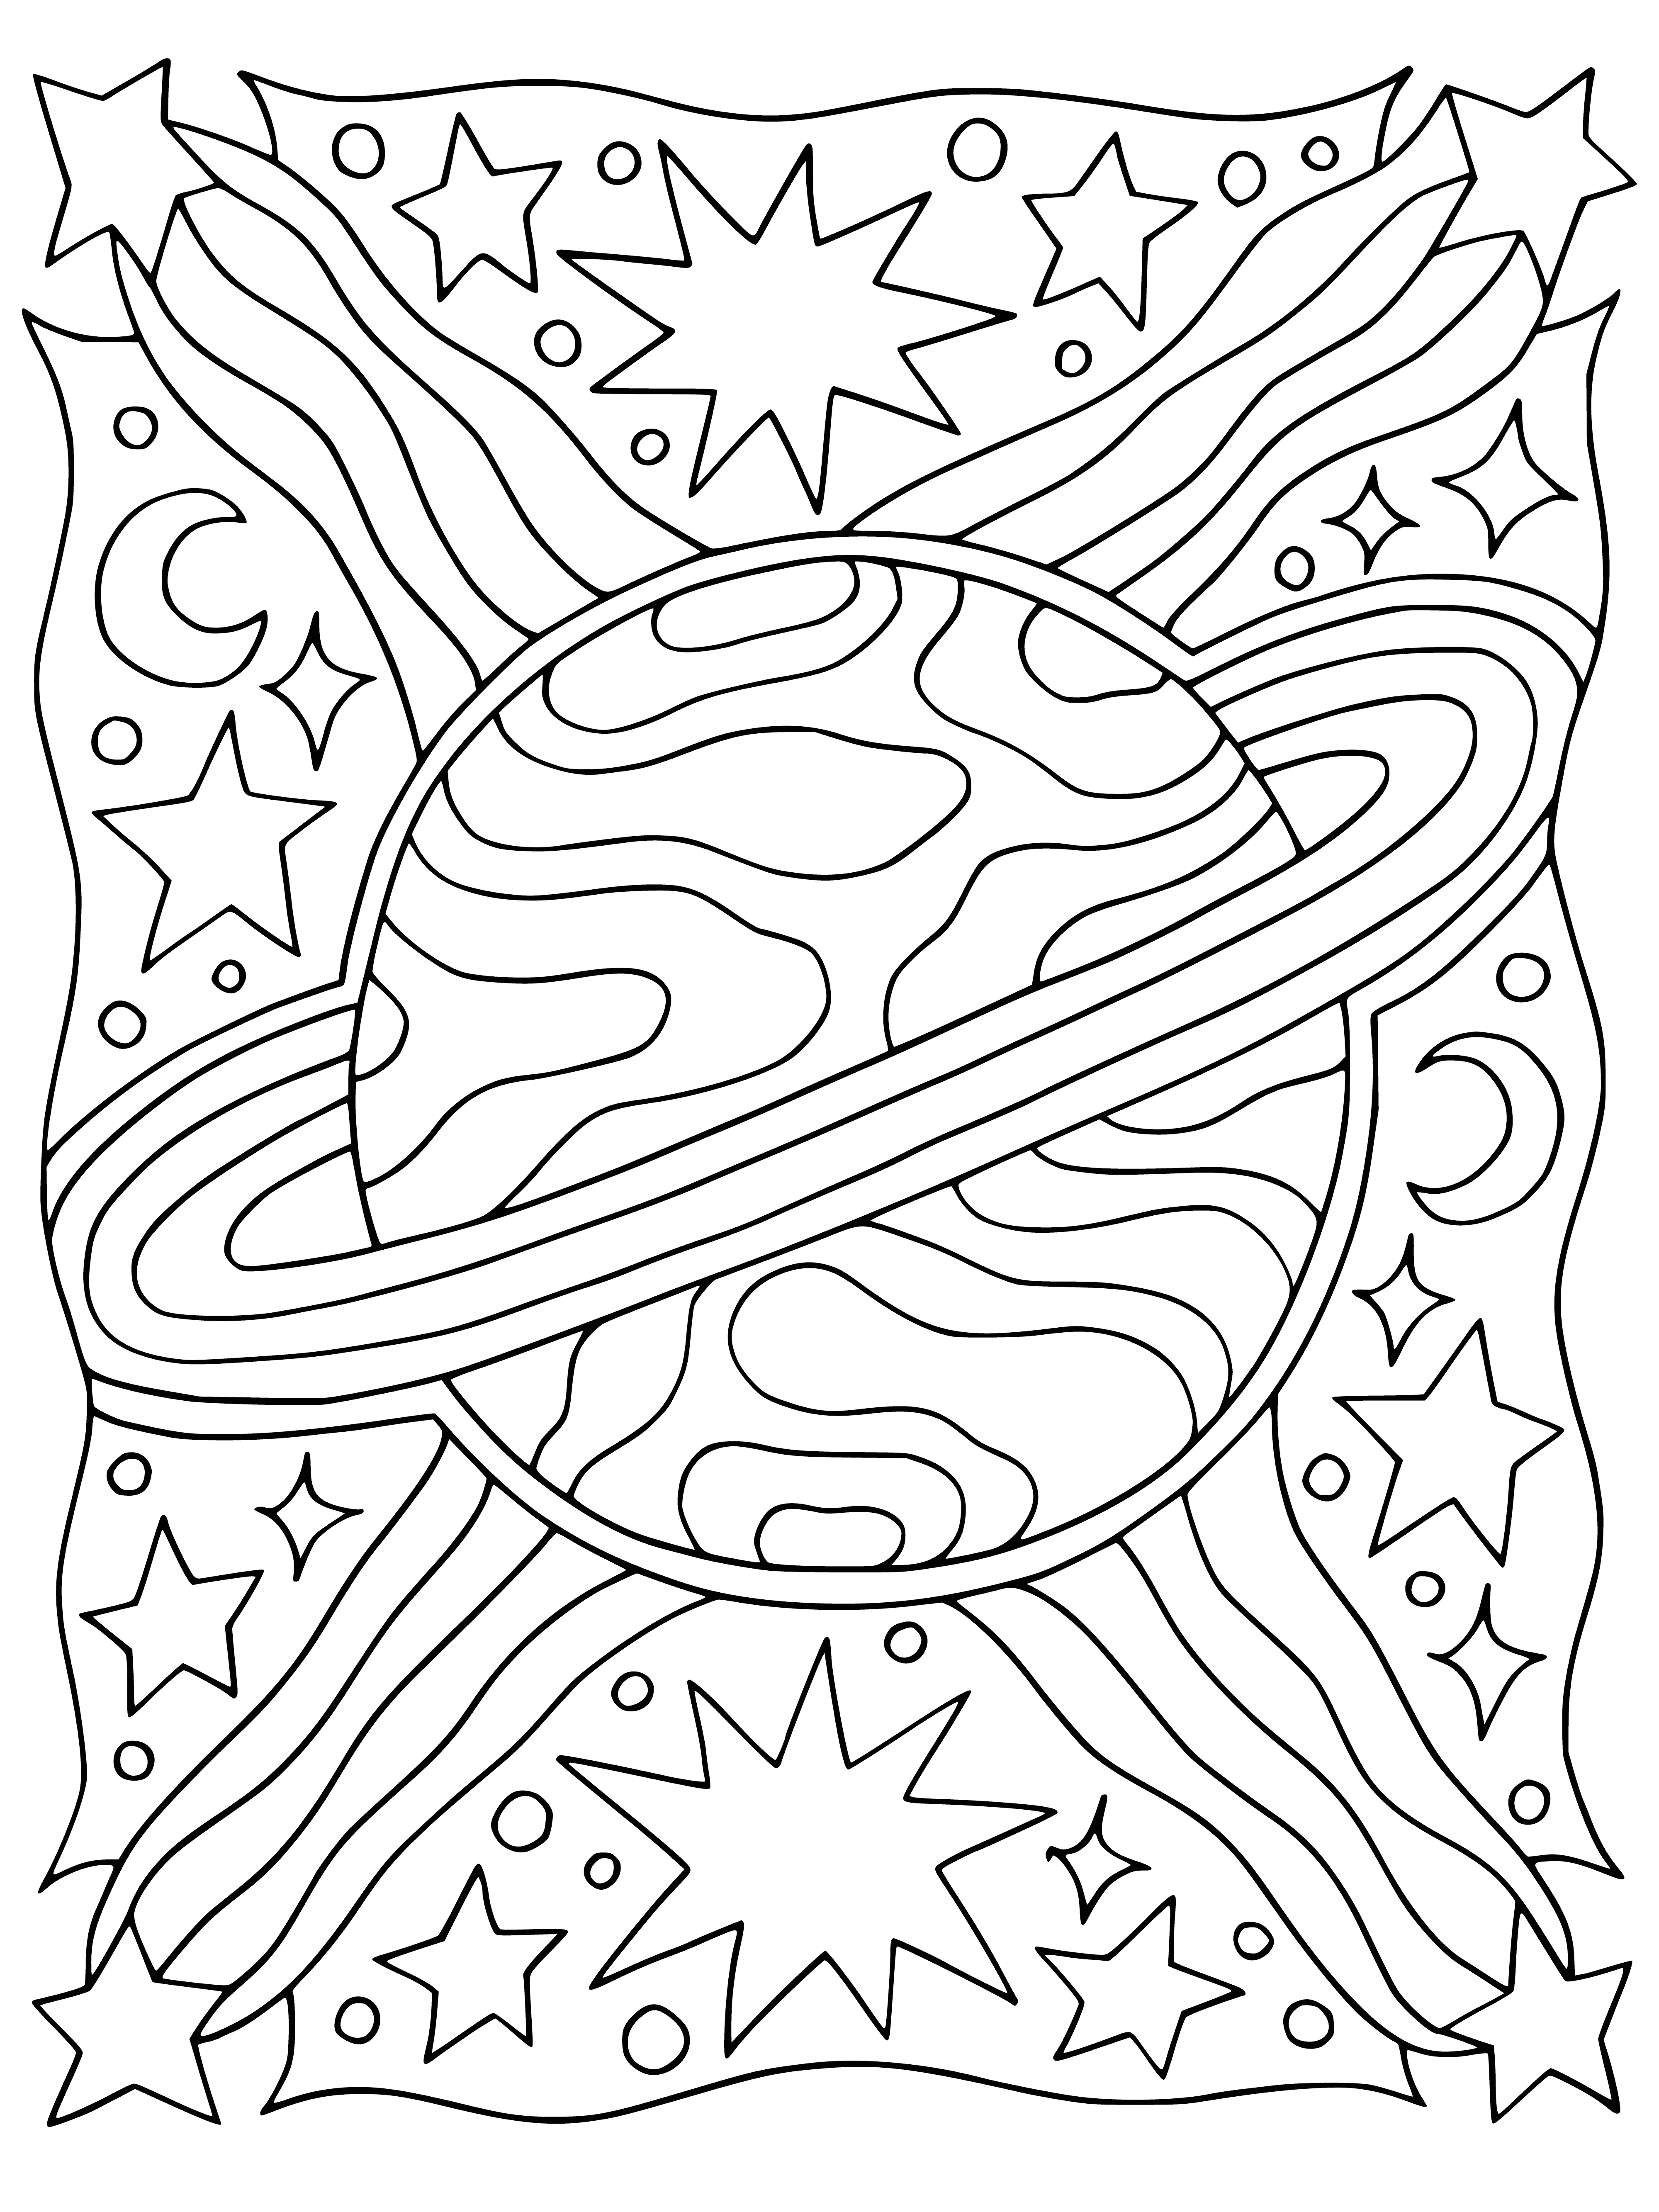 coloring page: -> Fun coloring page of swirling planets and stars in a black background border.